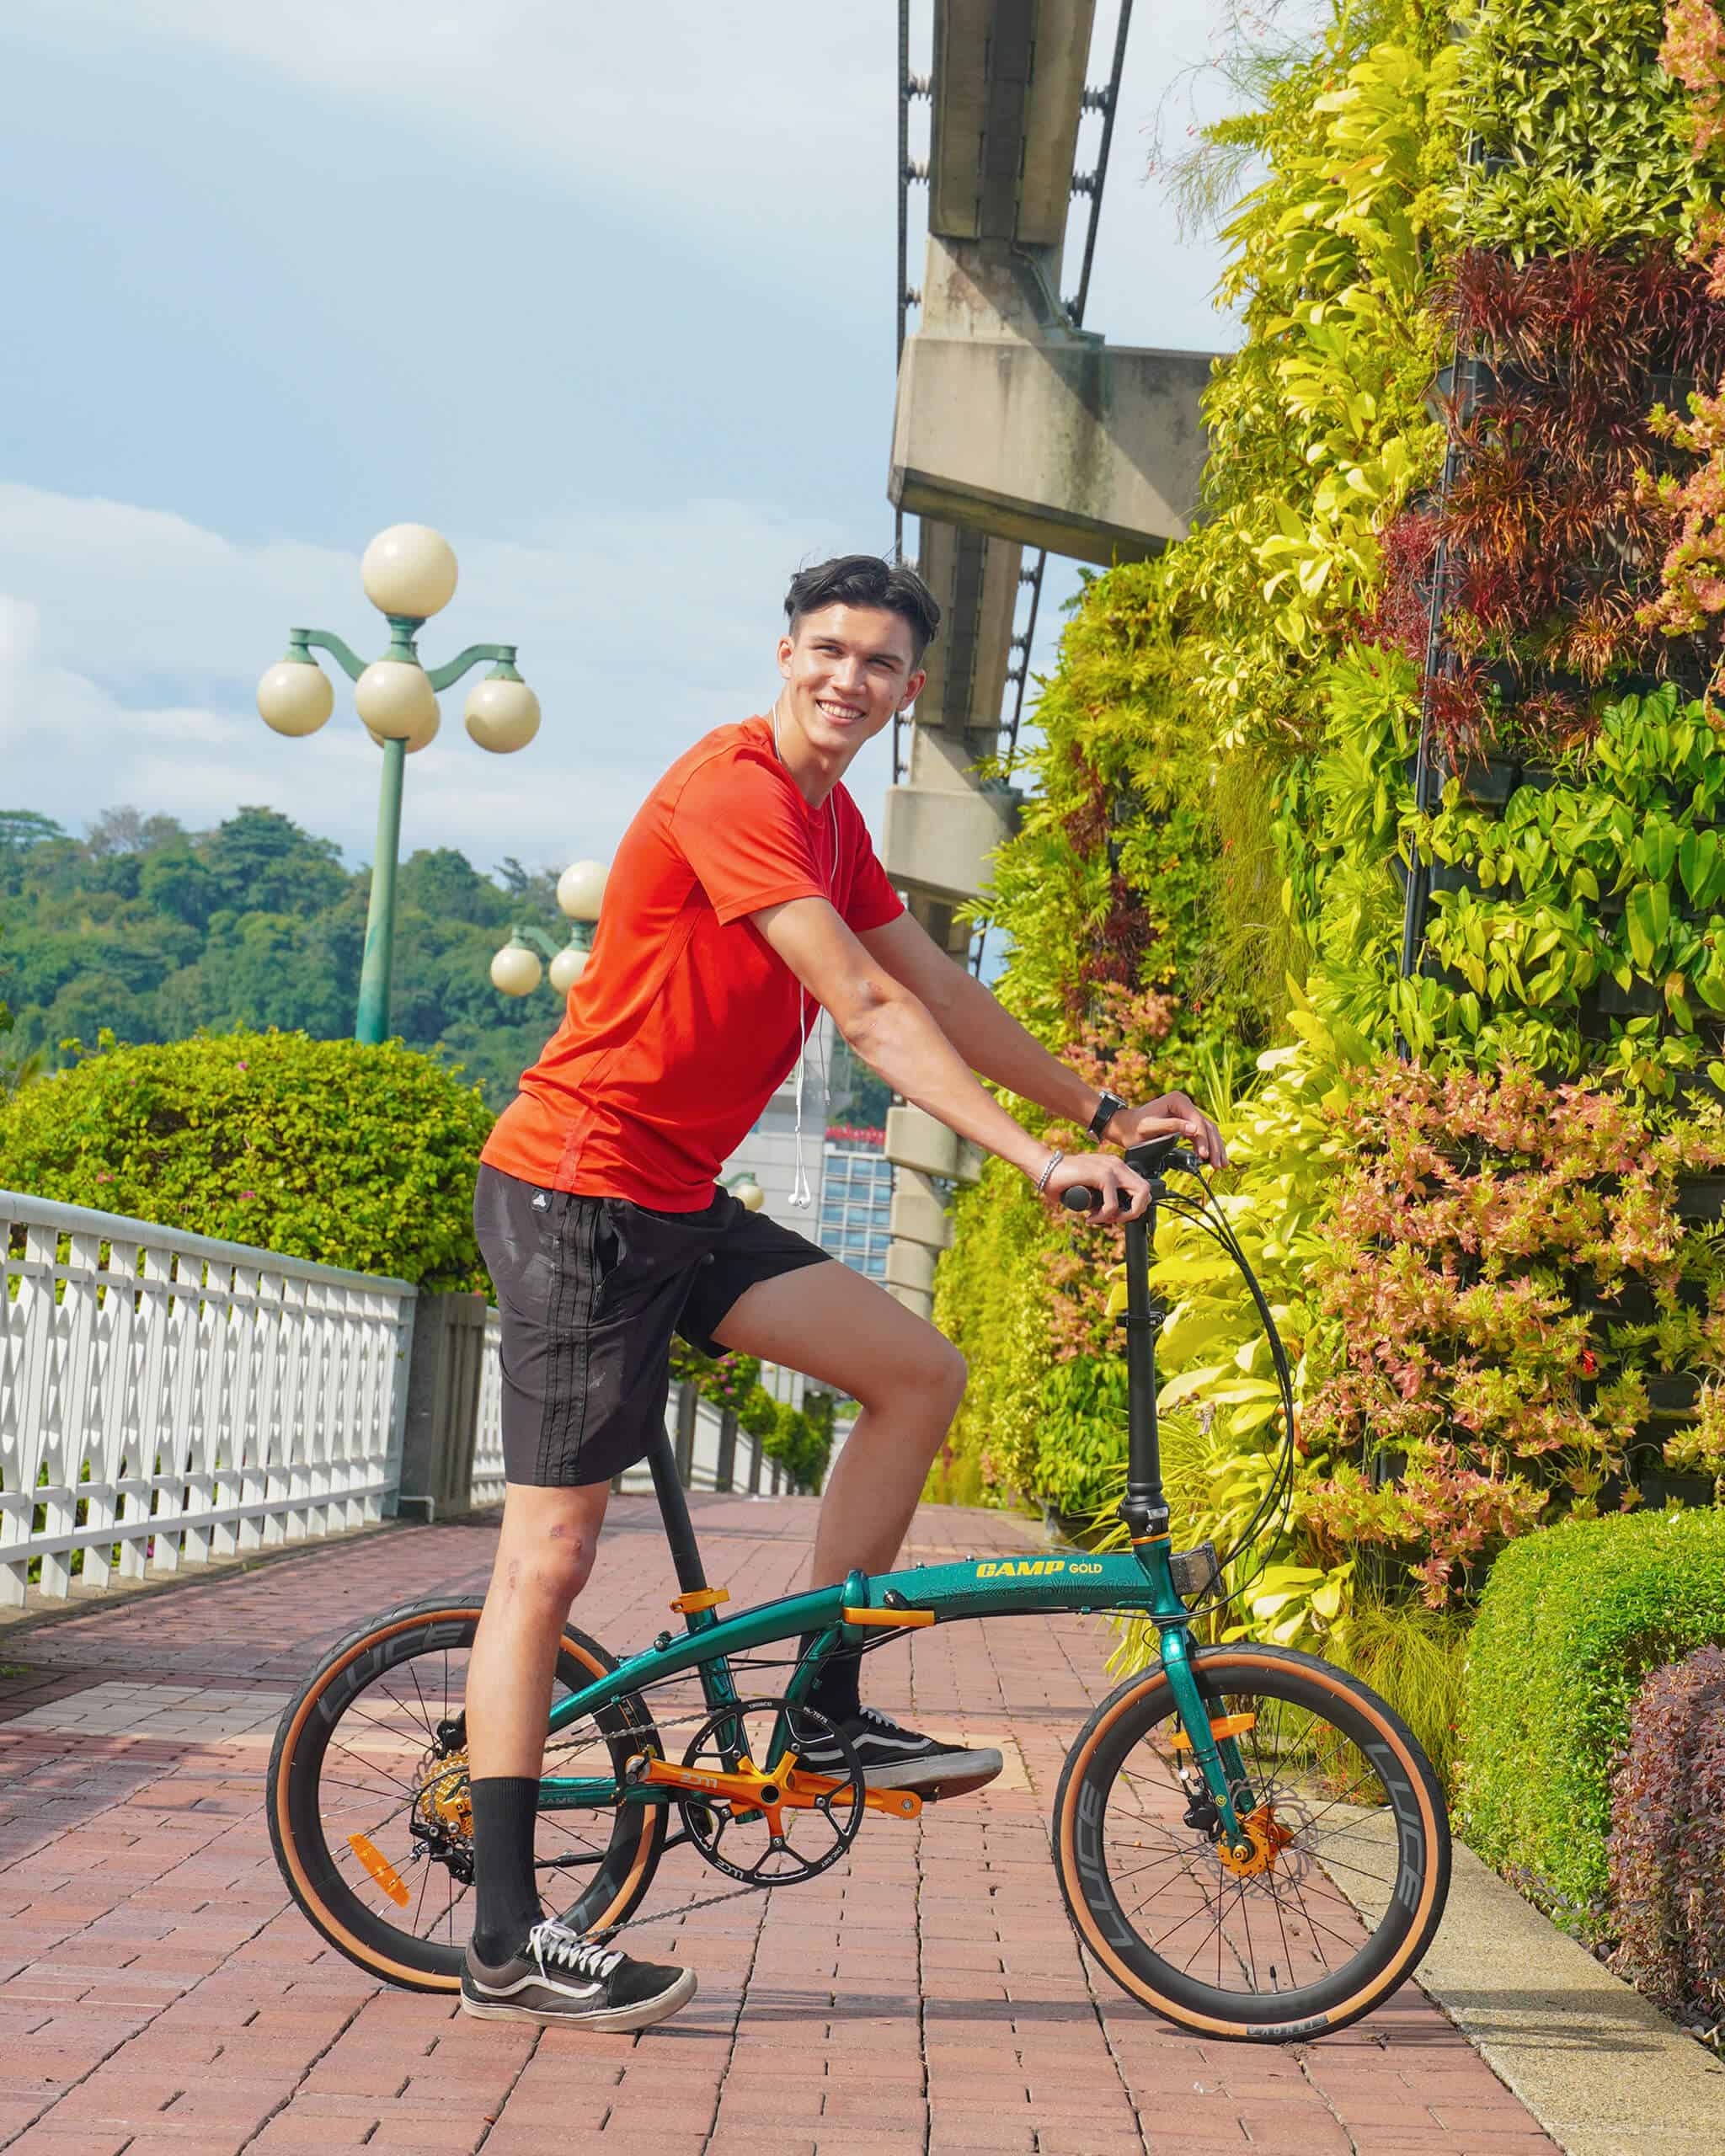 CAMP Gold Sport SHINNING GREEN foldable bicycle with Nicholas at Sentosa bridge - Top 8 Cycling Routes On A Foldable Bicycle In Singapore